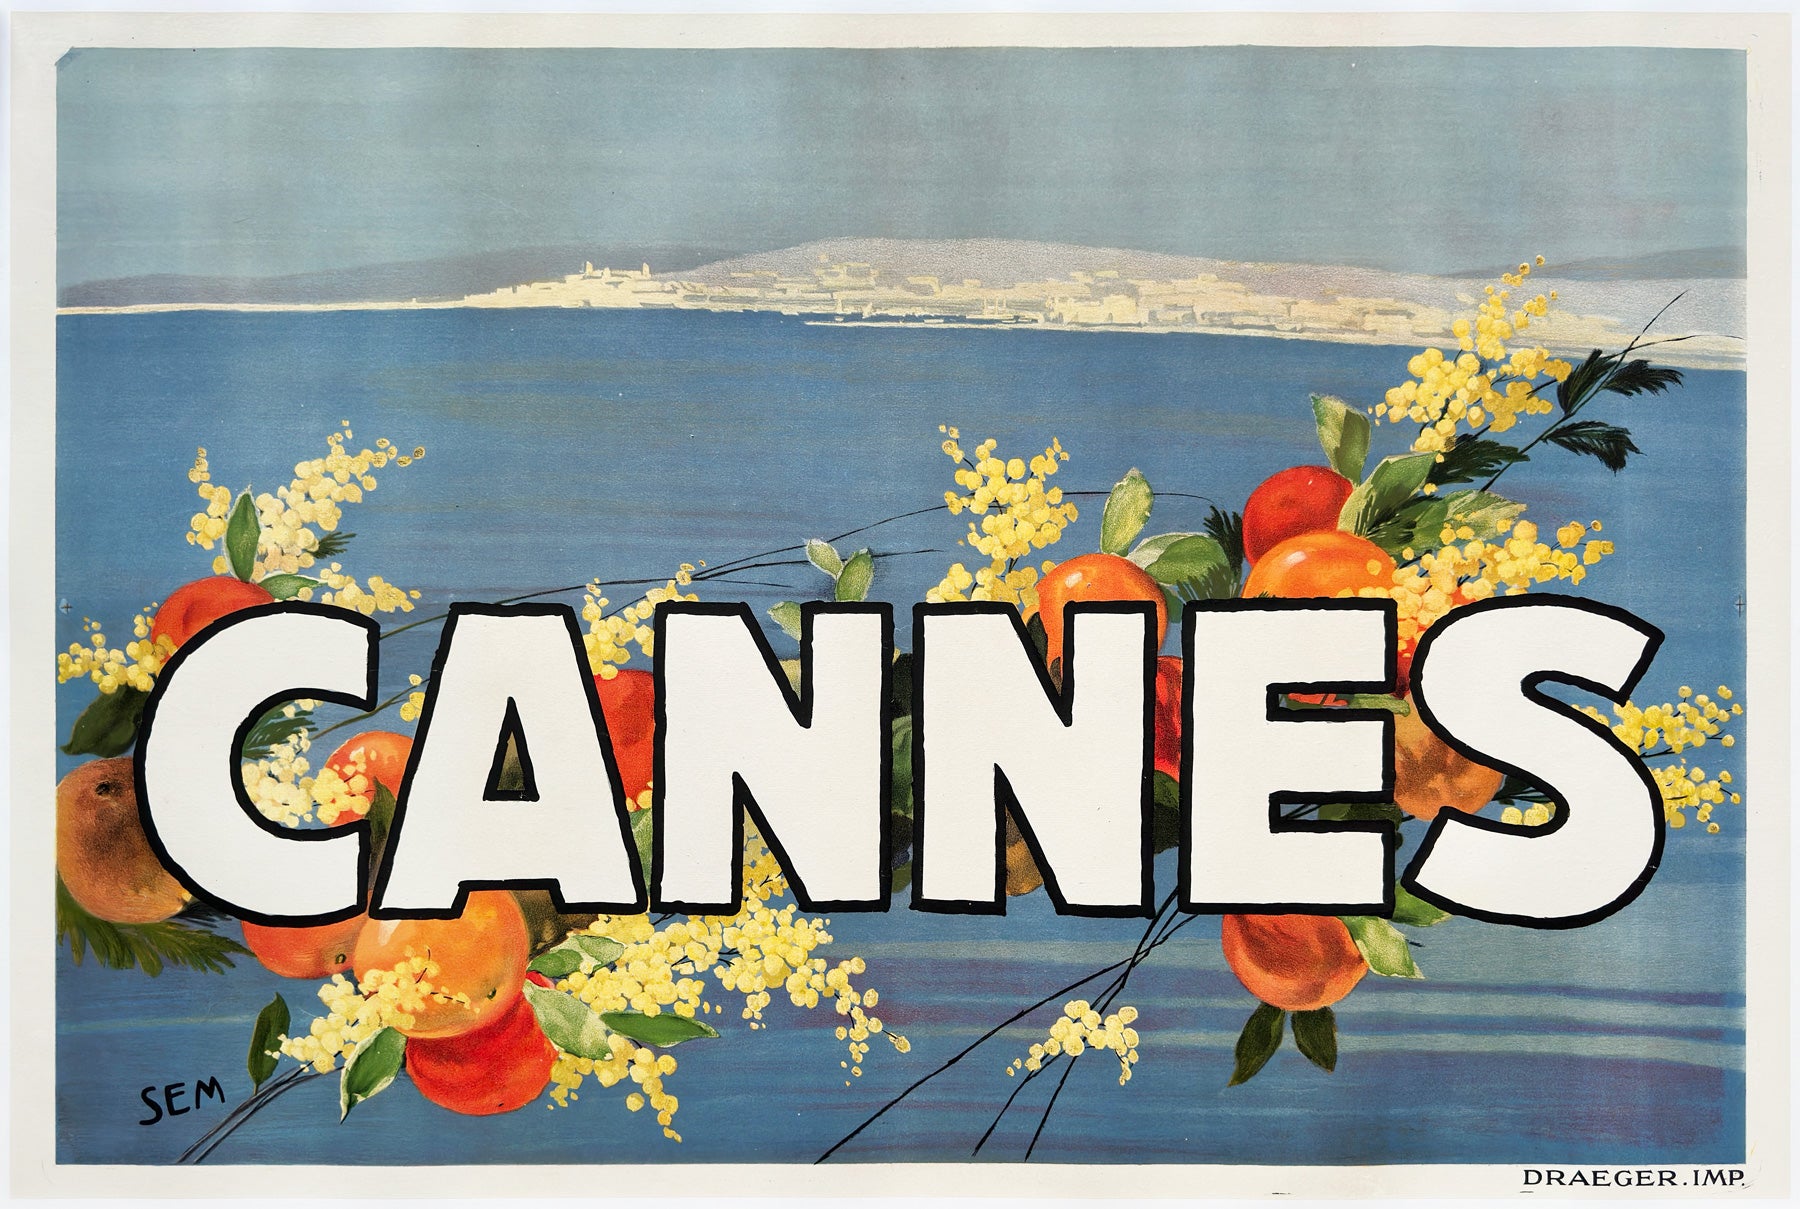 Cannes 1930 French Advertising Travel Poster, George Goursat